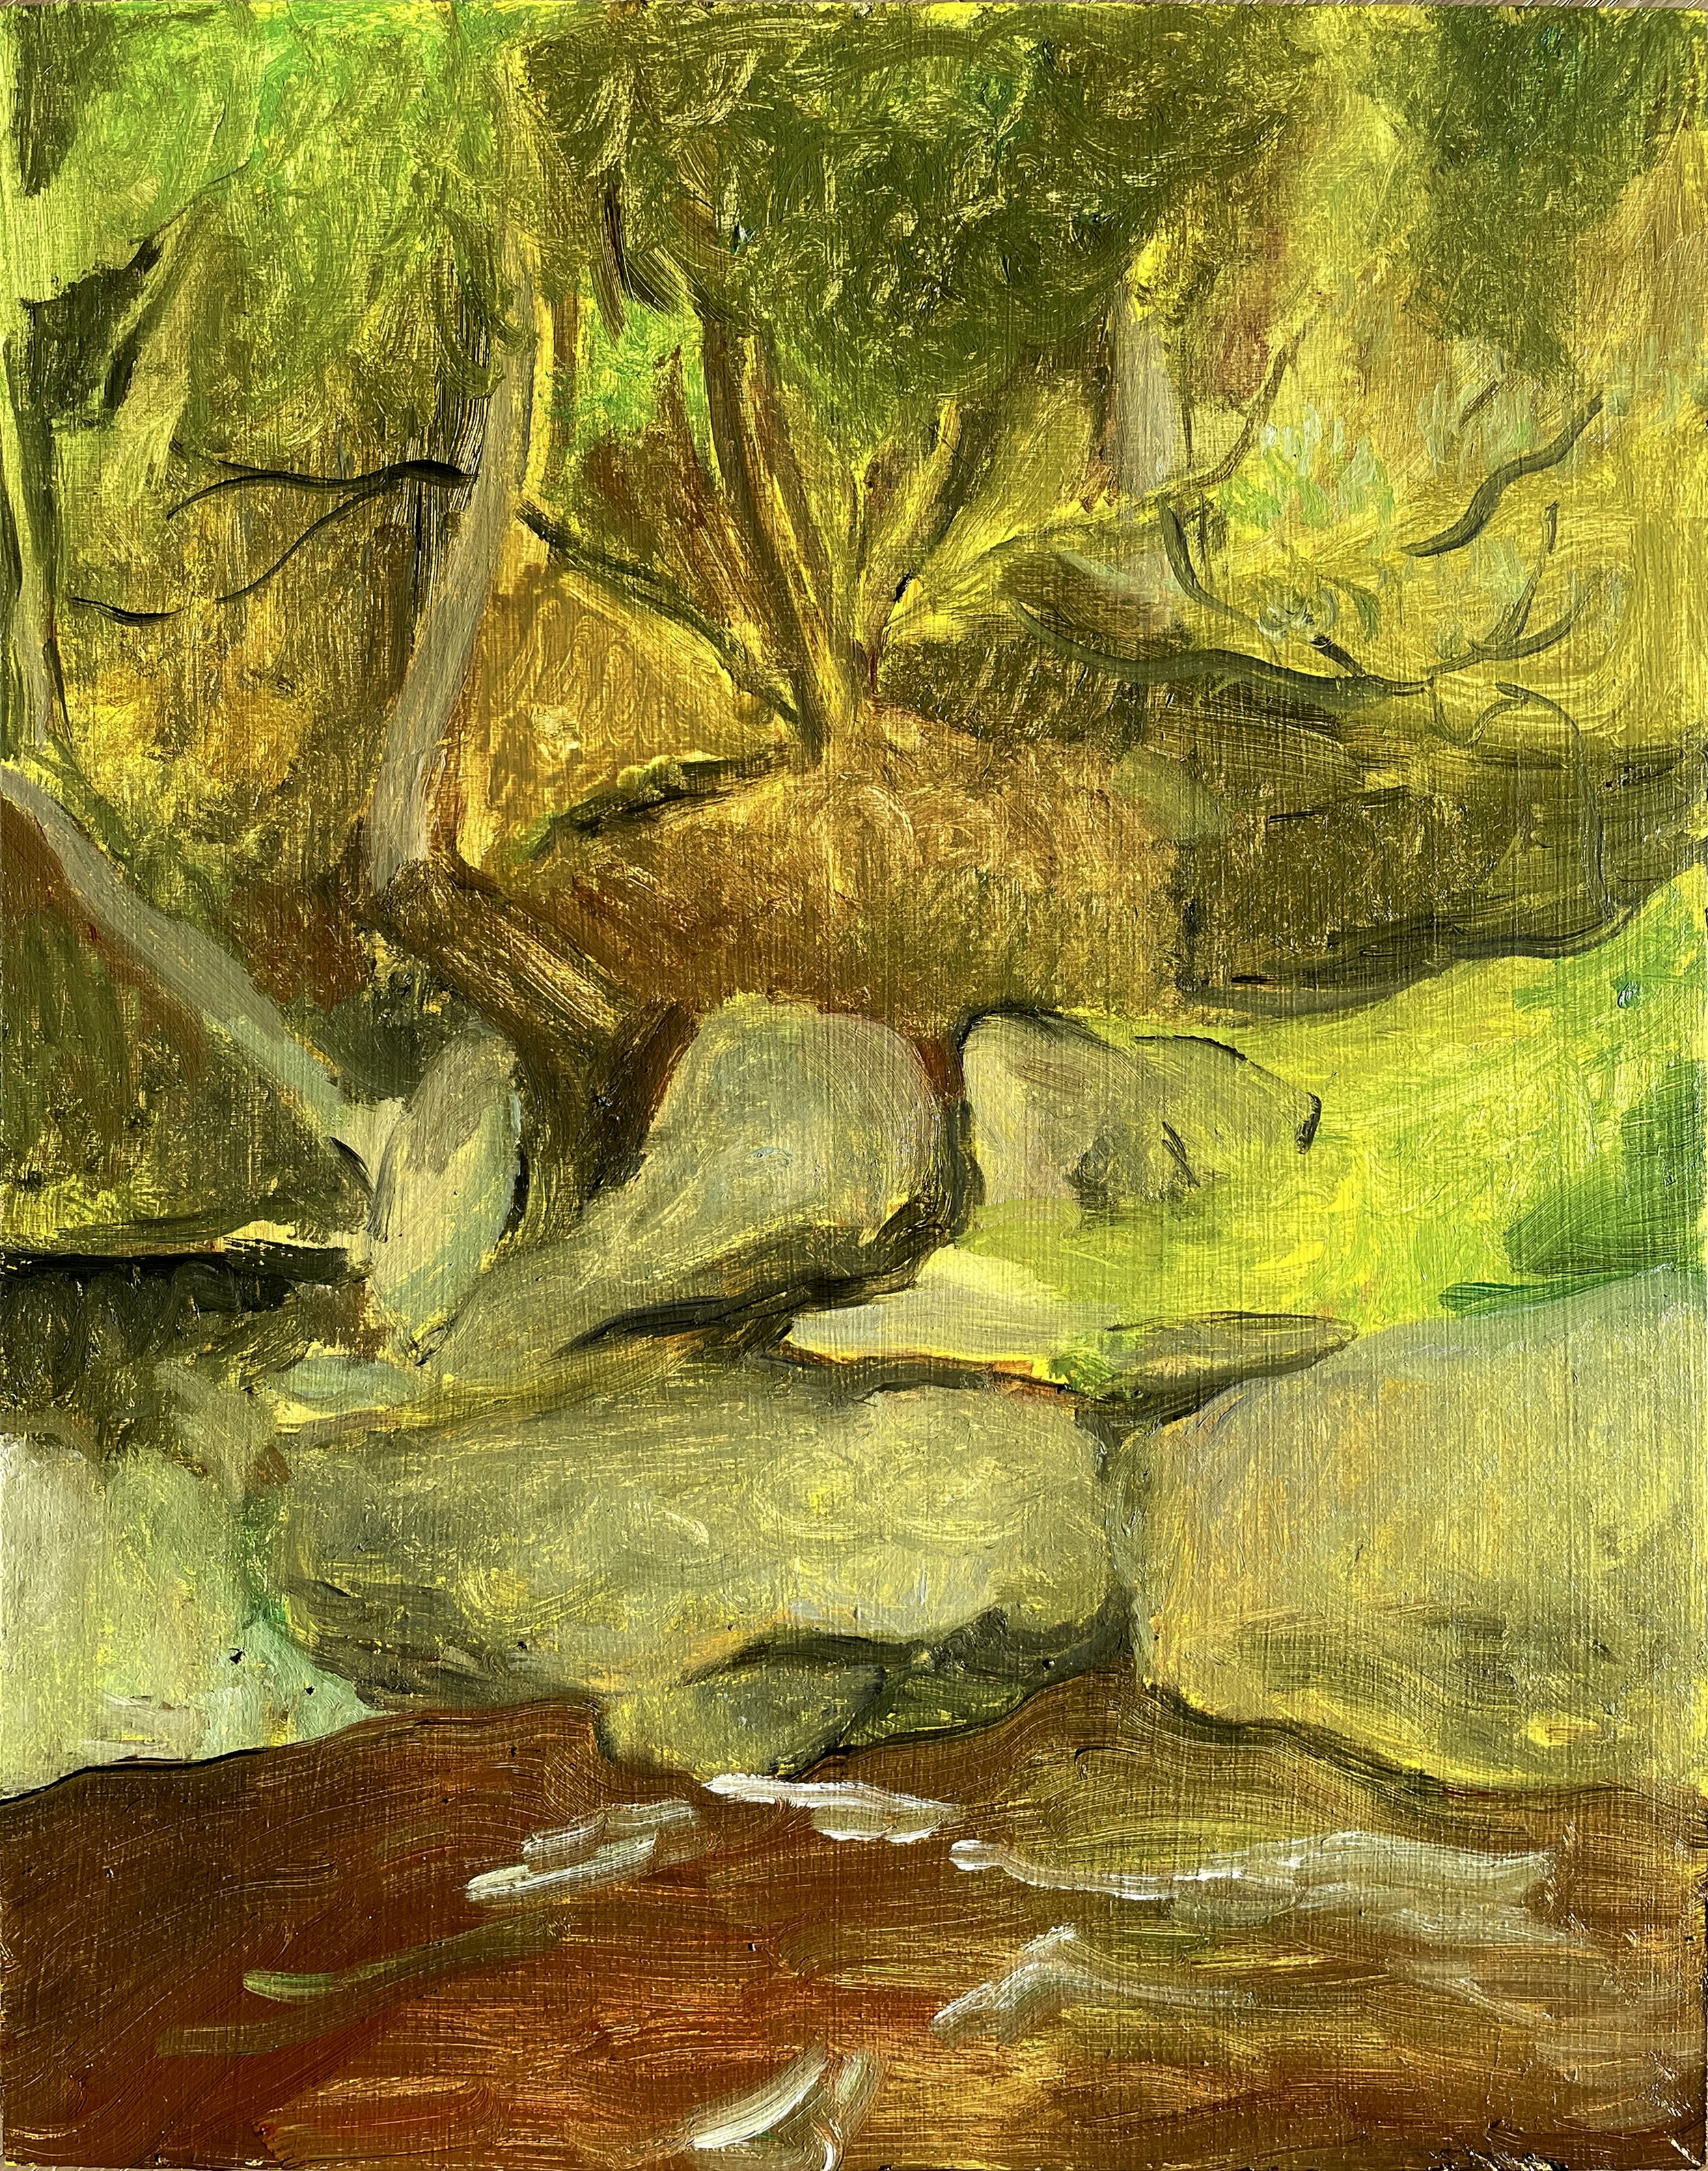   Creek , 14x11 Inches, Oil on Wood, 2022 